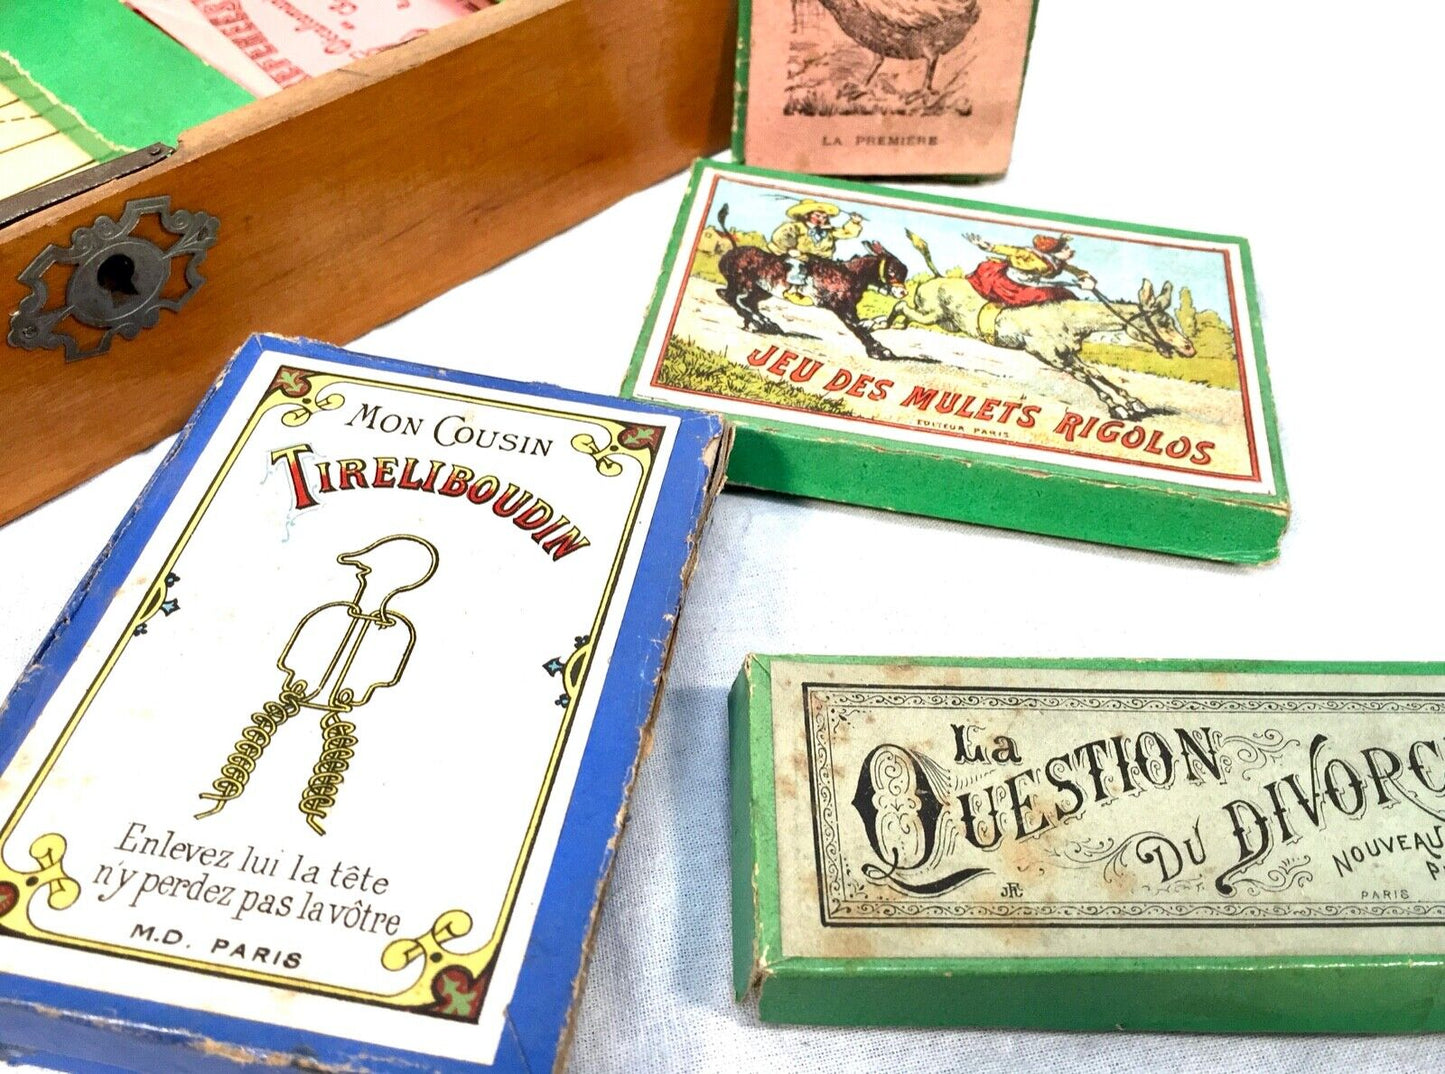 Antique Collection on French 'Jeux Nouveaux' Miniature Classic Games in Box 1900